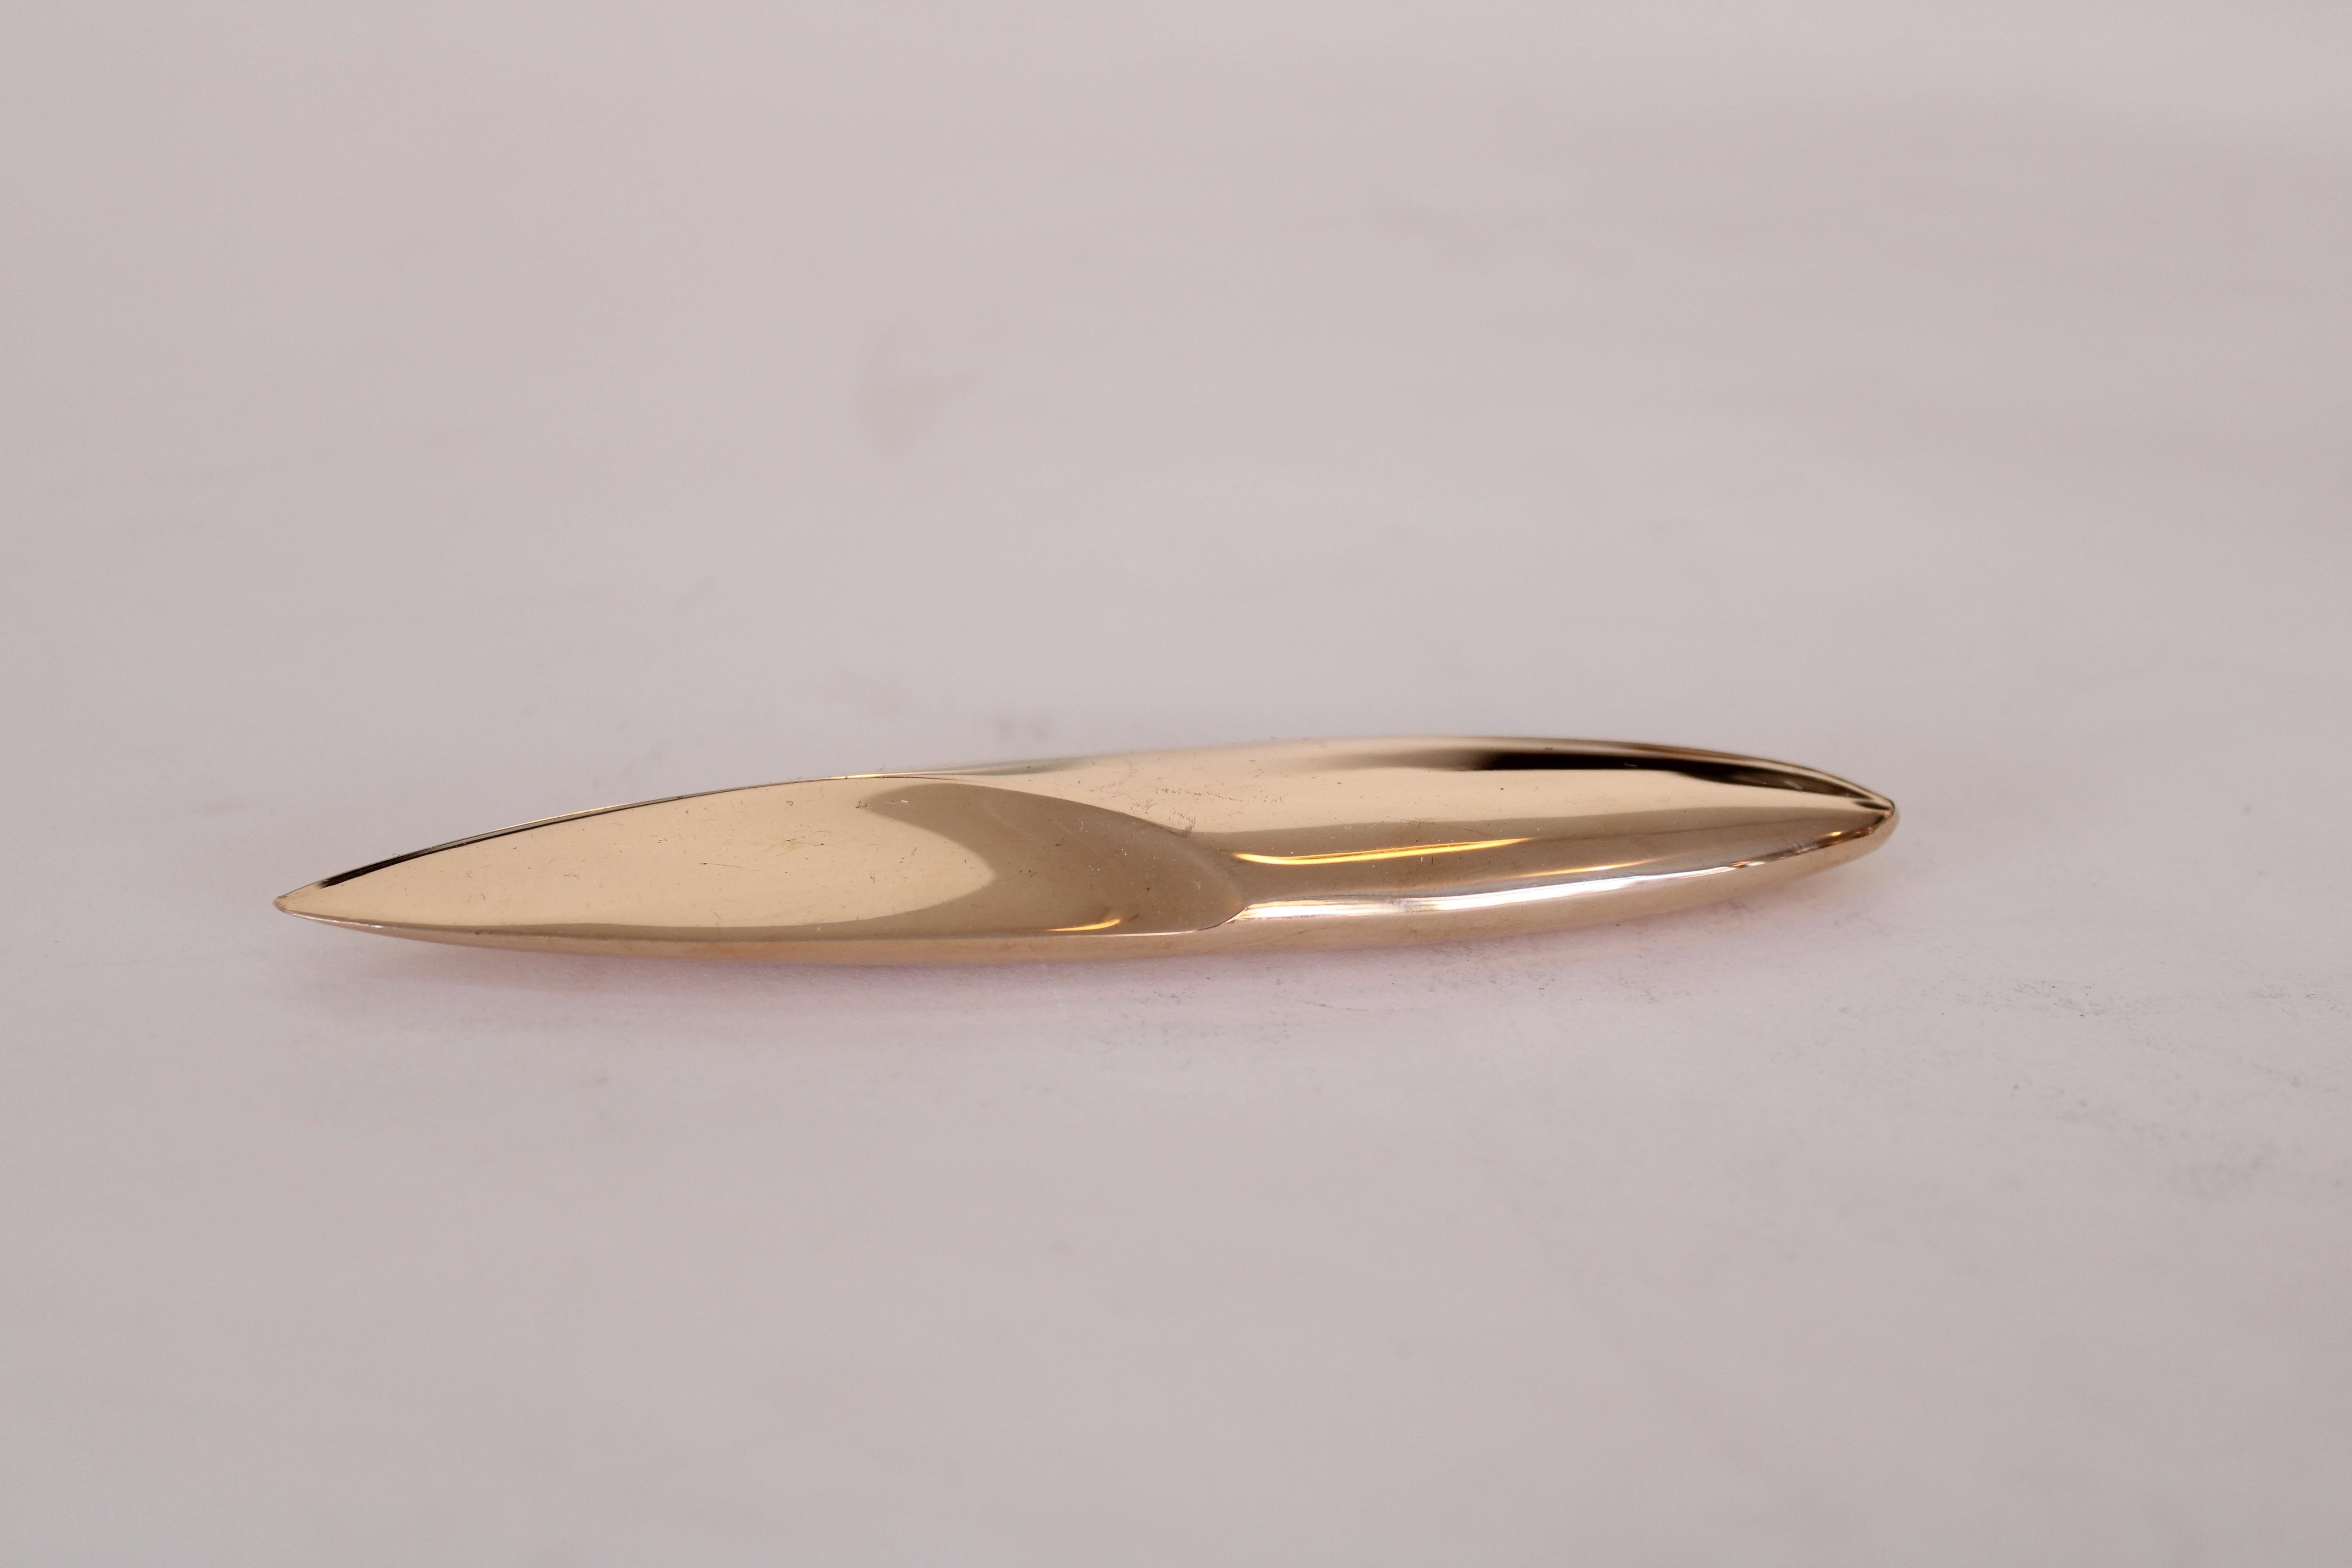 Monique Gerber French bronze cast letter opener in a very sculptural and minimalist form. 
Designed Monique Gerber. 
Can be used as a sculptural object or paper weight as well.
Reminiscent of a Brancusi form. 
Signed MG France.
Excellent